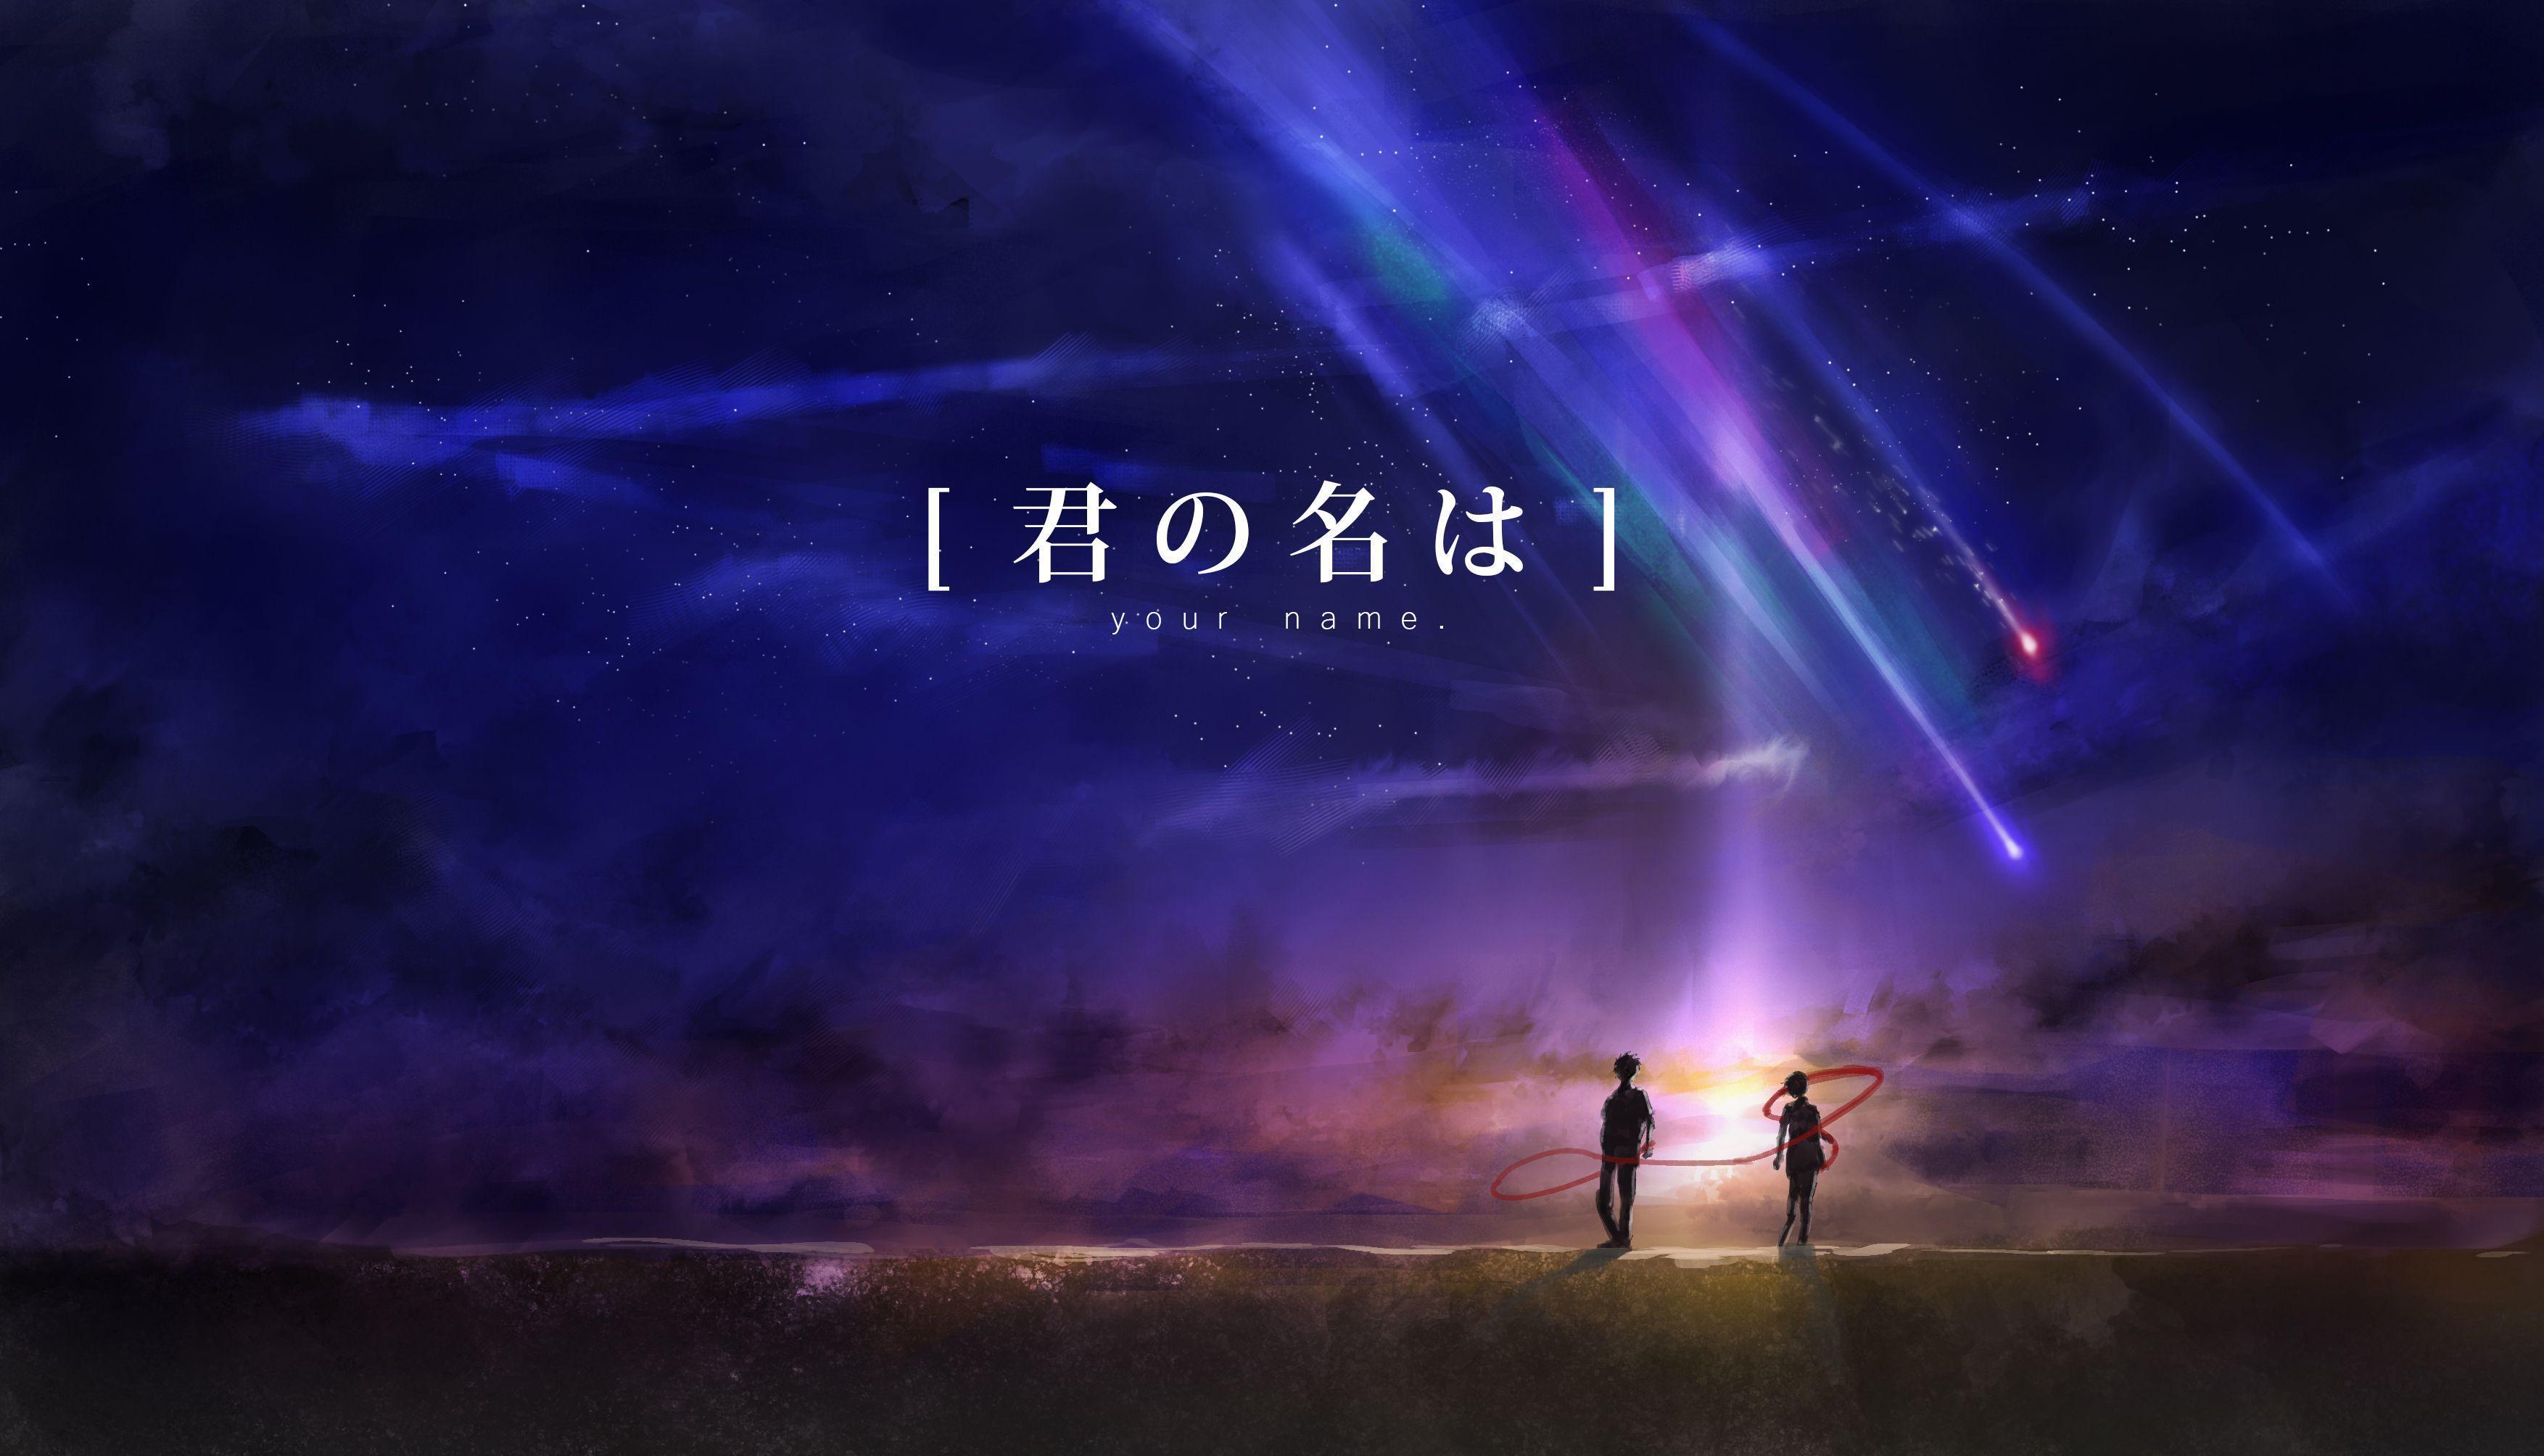 Your Name Download Wallpaper, your name, Anime